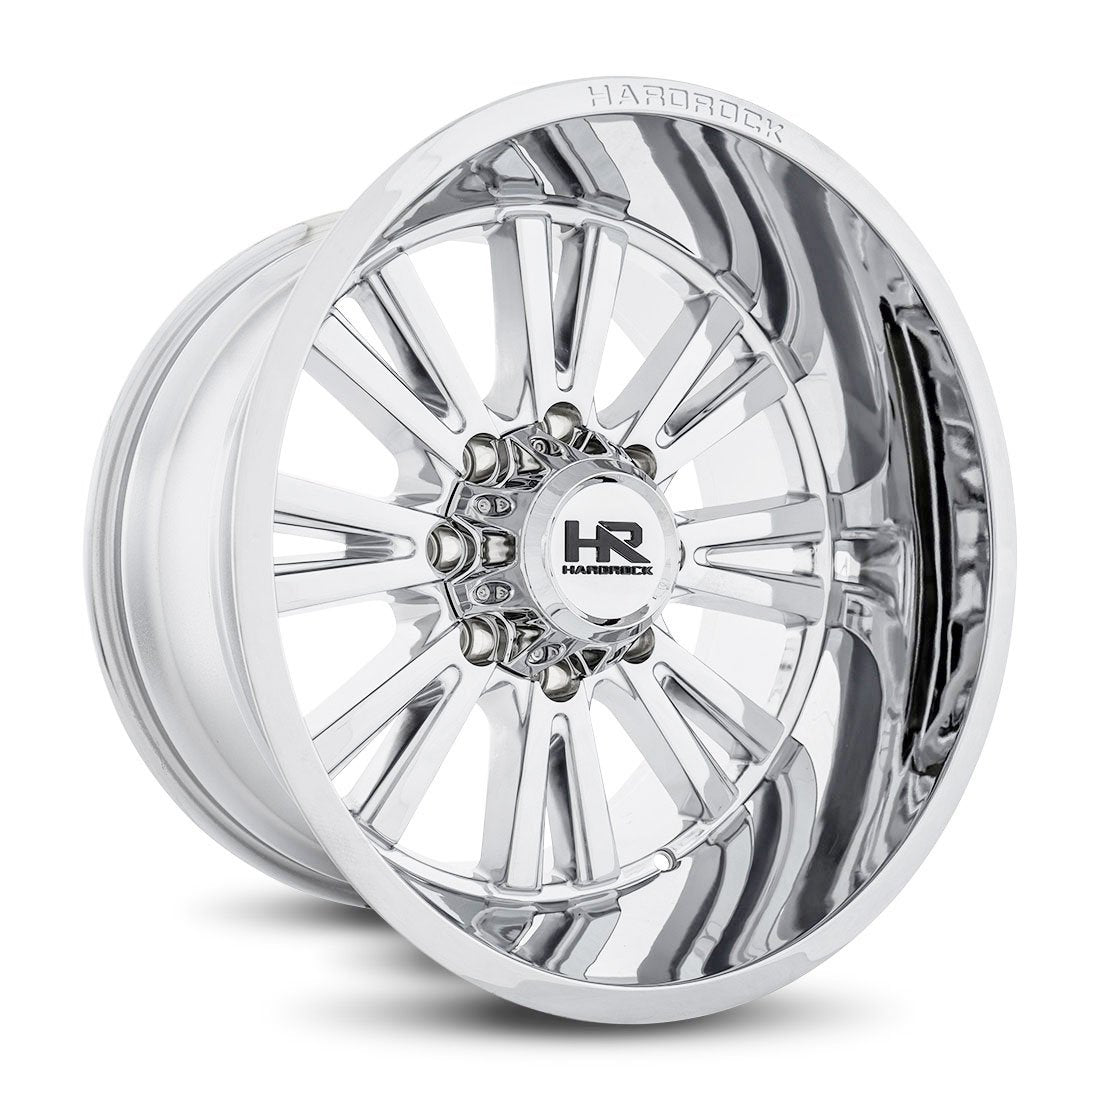 hardrock offroad wheels h503 spine xposed chrome